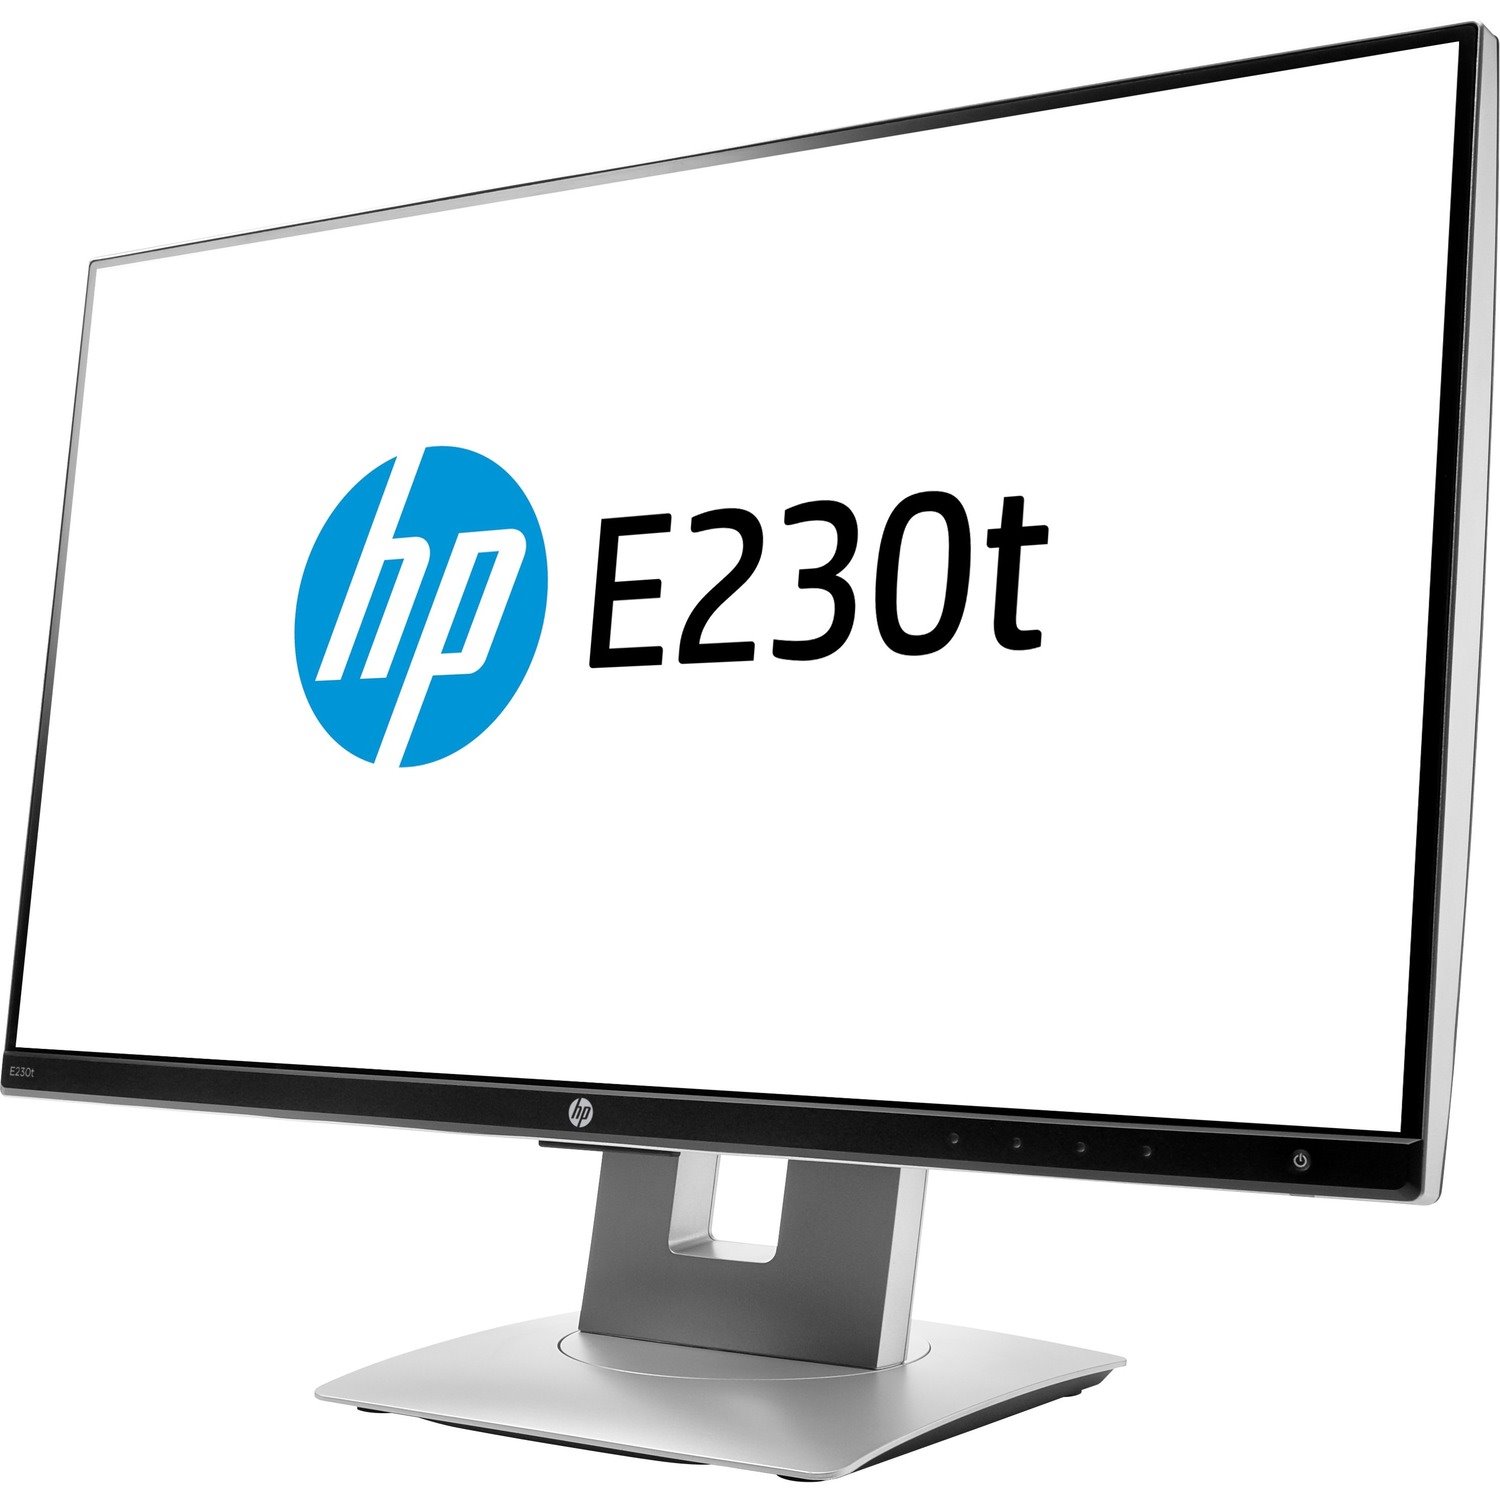 HP E230t 58.4 cm (23") LCD Touchscreen Monitor - 16:9 - 5 ms On/Off